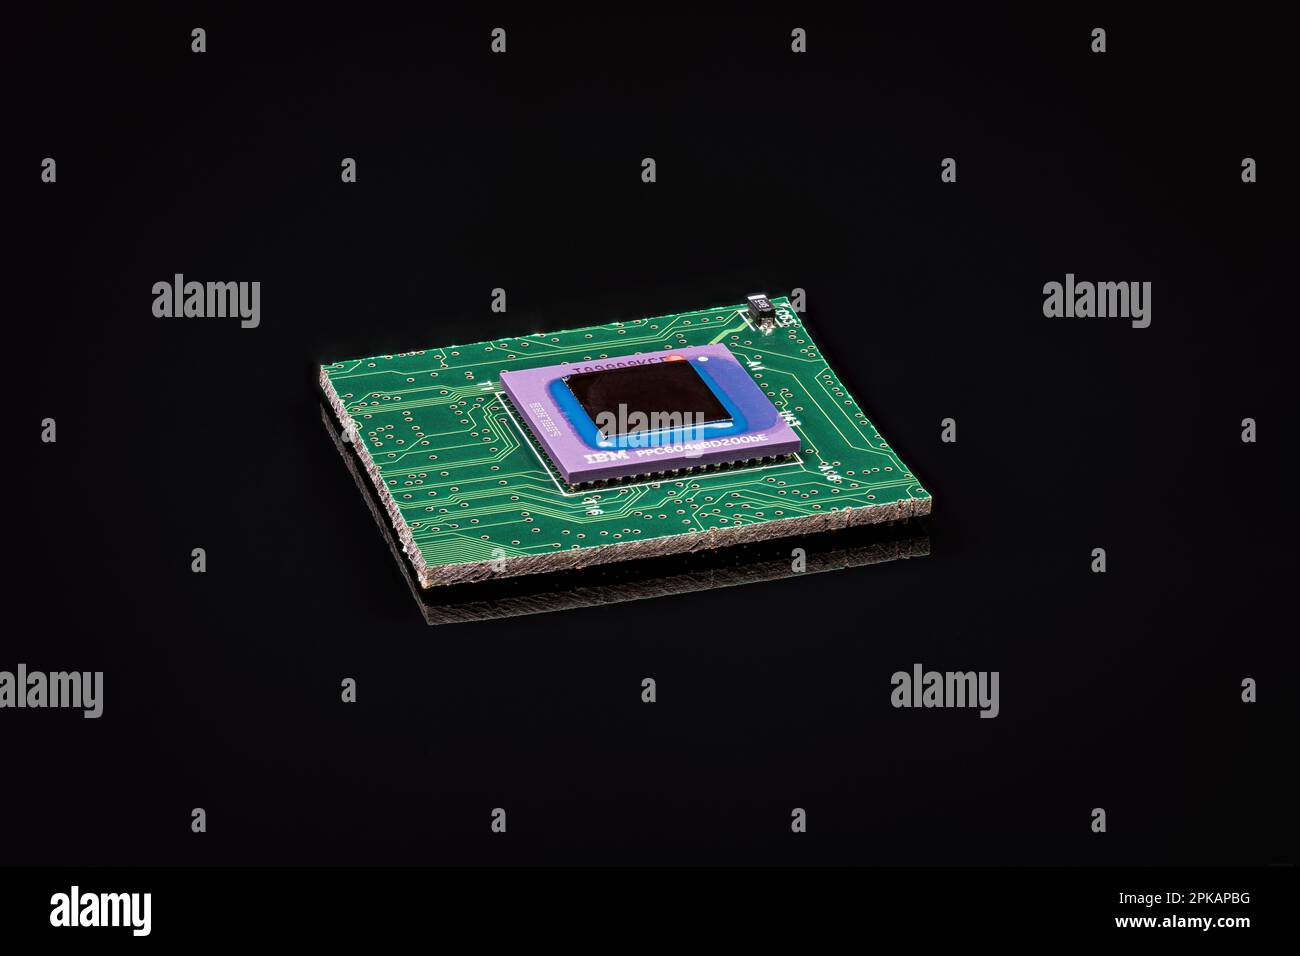 Computer, computer part, processor, fan, focus stacking, macro, large depth of field, PC, component, electronics, computer electronics, CPU, semiconductor, computer technology, central processing unit, processor cooling, main processor, central processing unit, microelectronics, Stock Photo